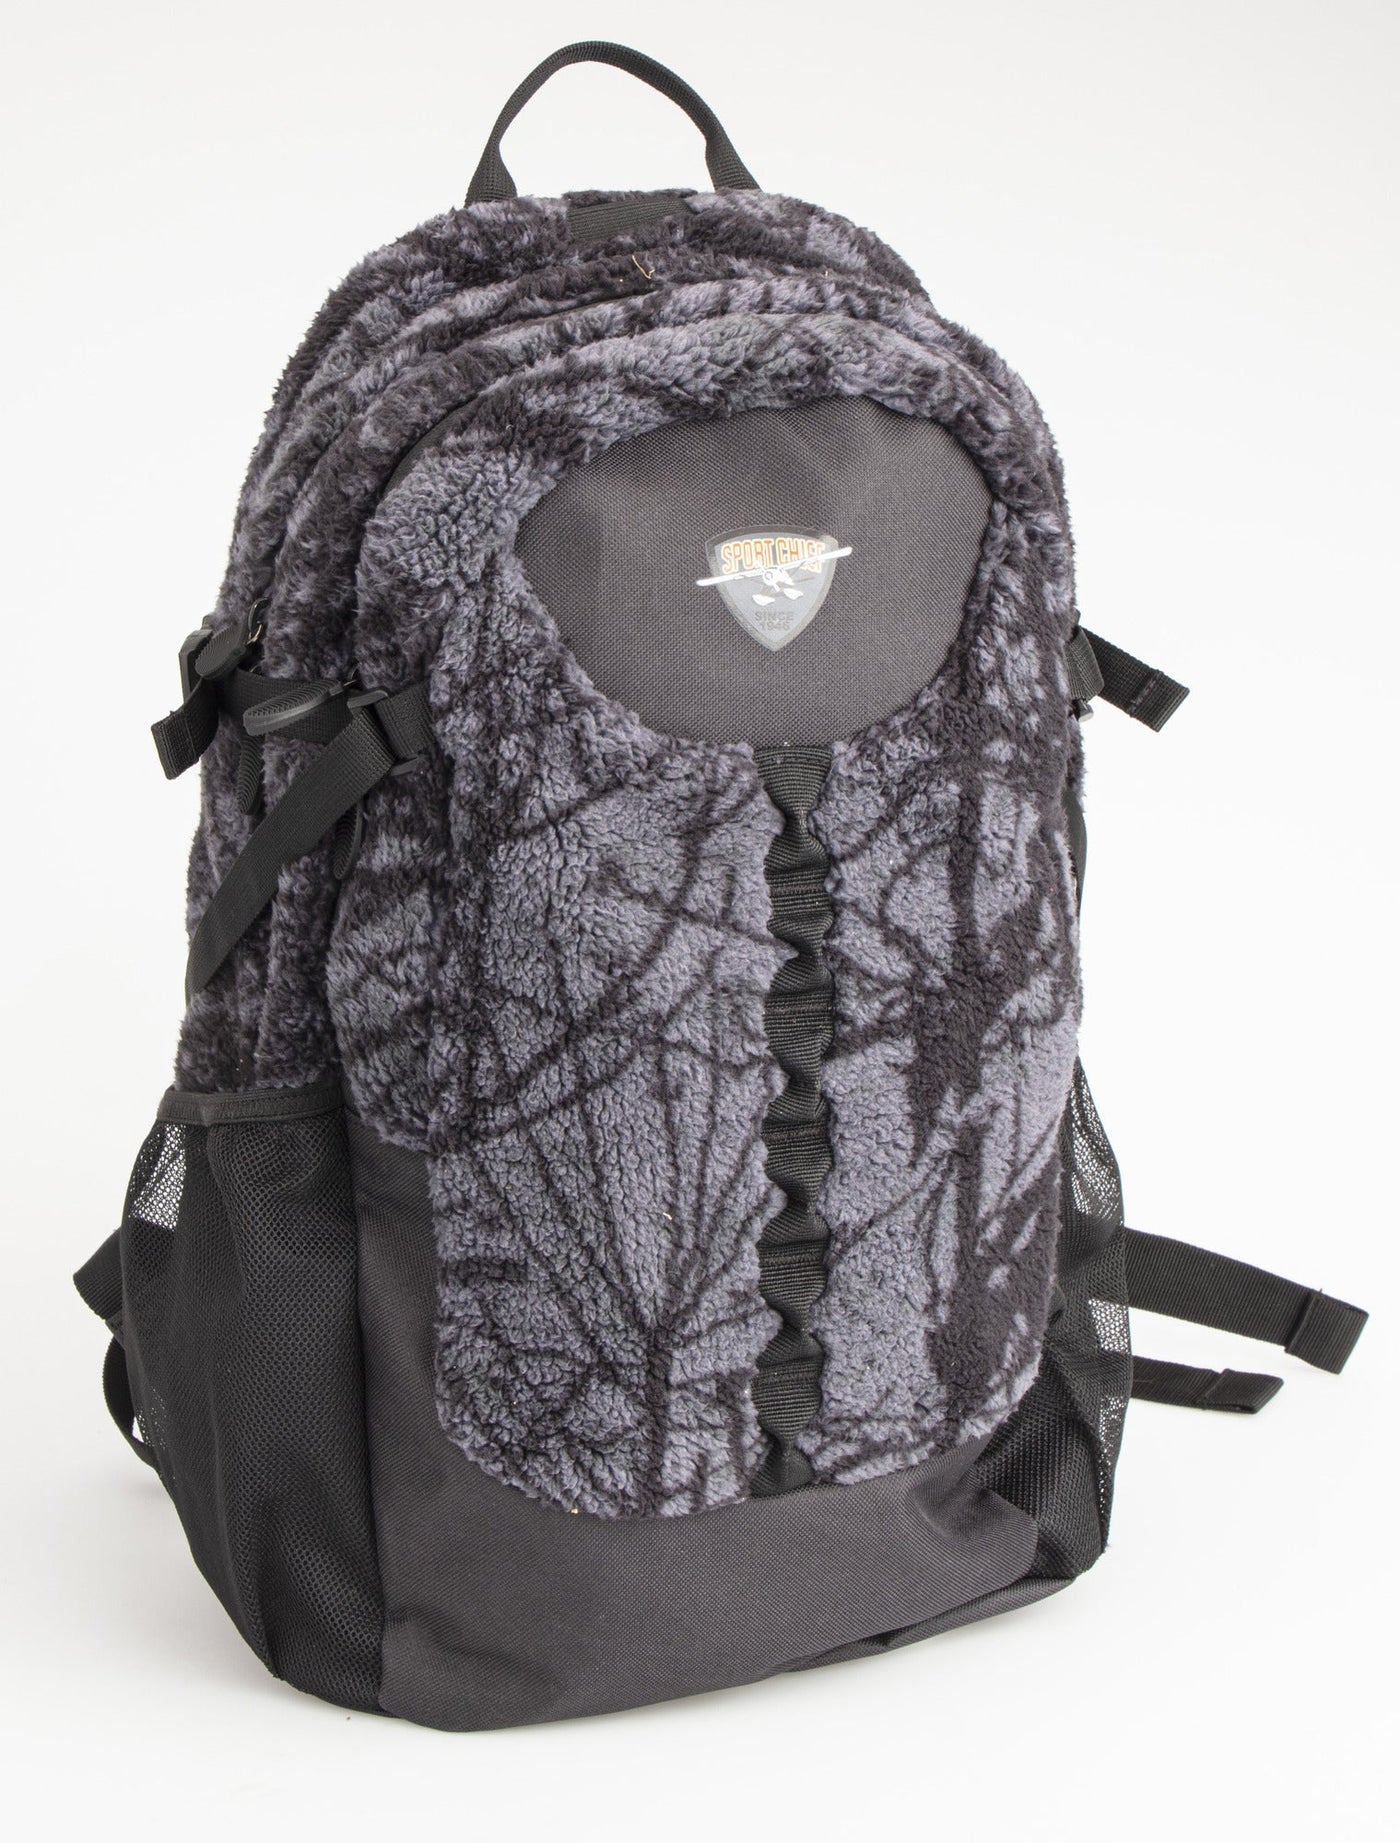 Ultra-quiet "Ghost" hunting backpack